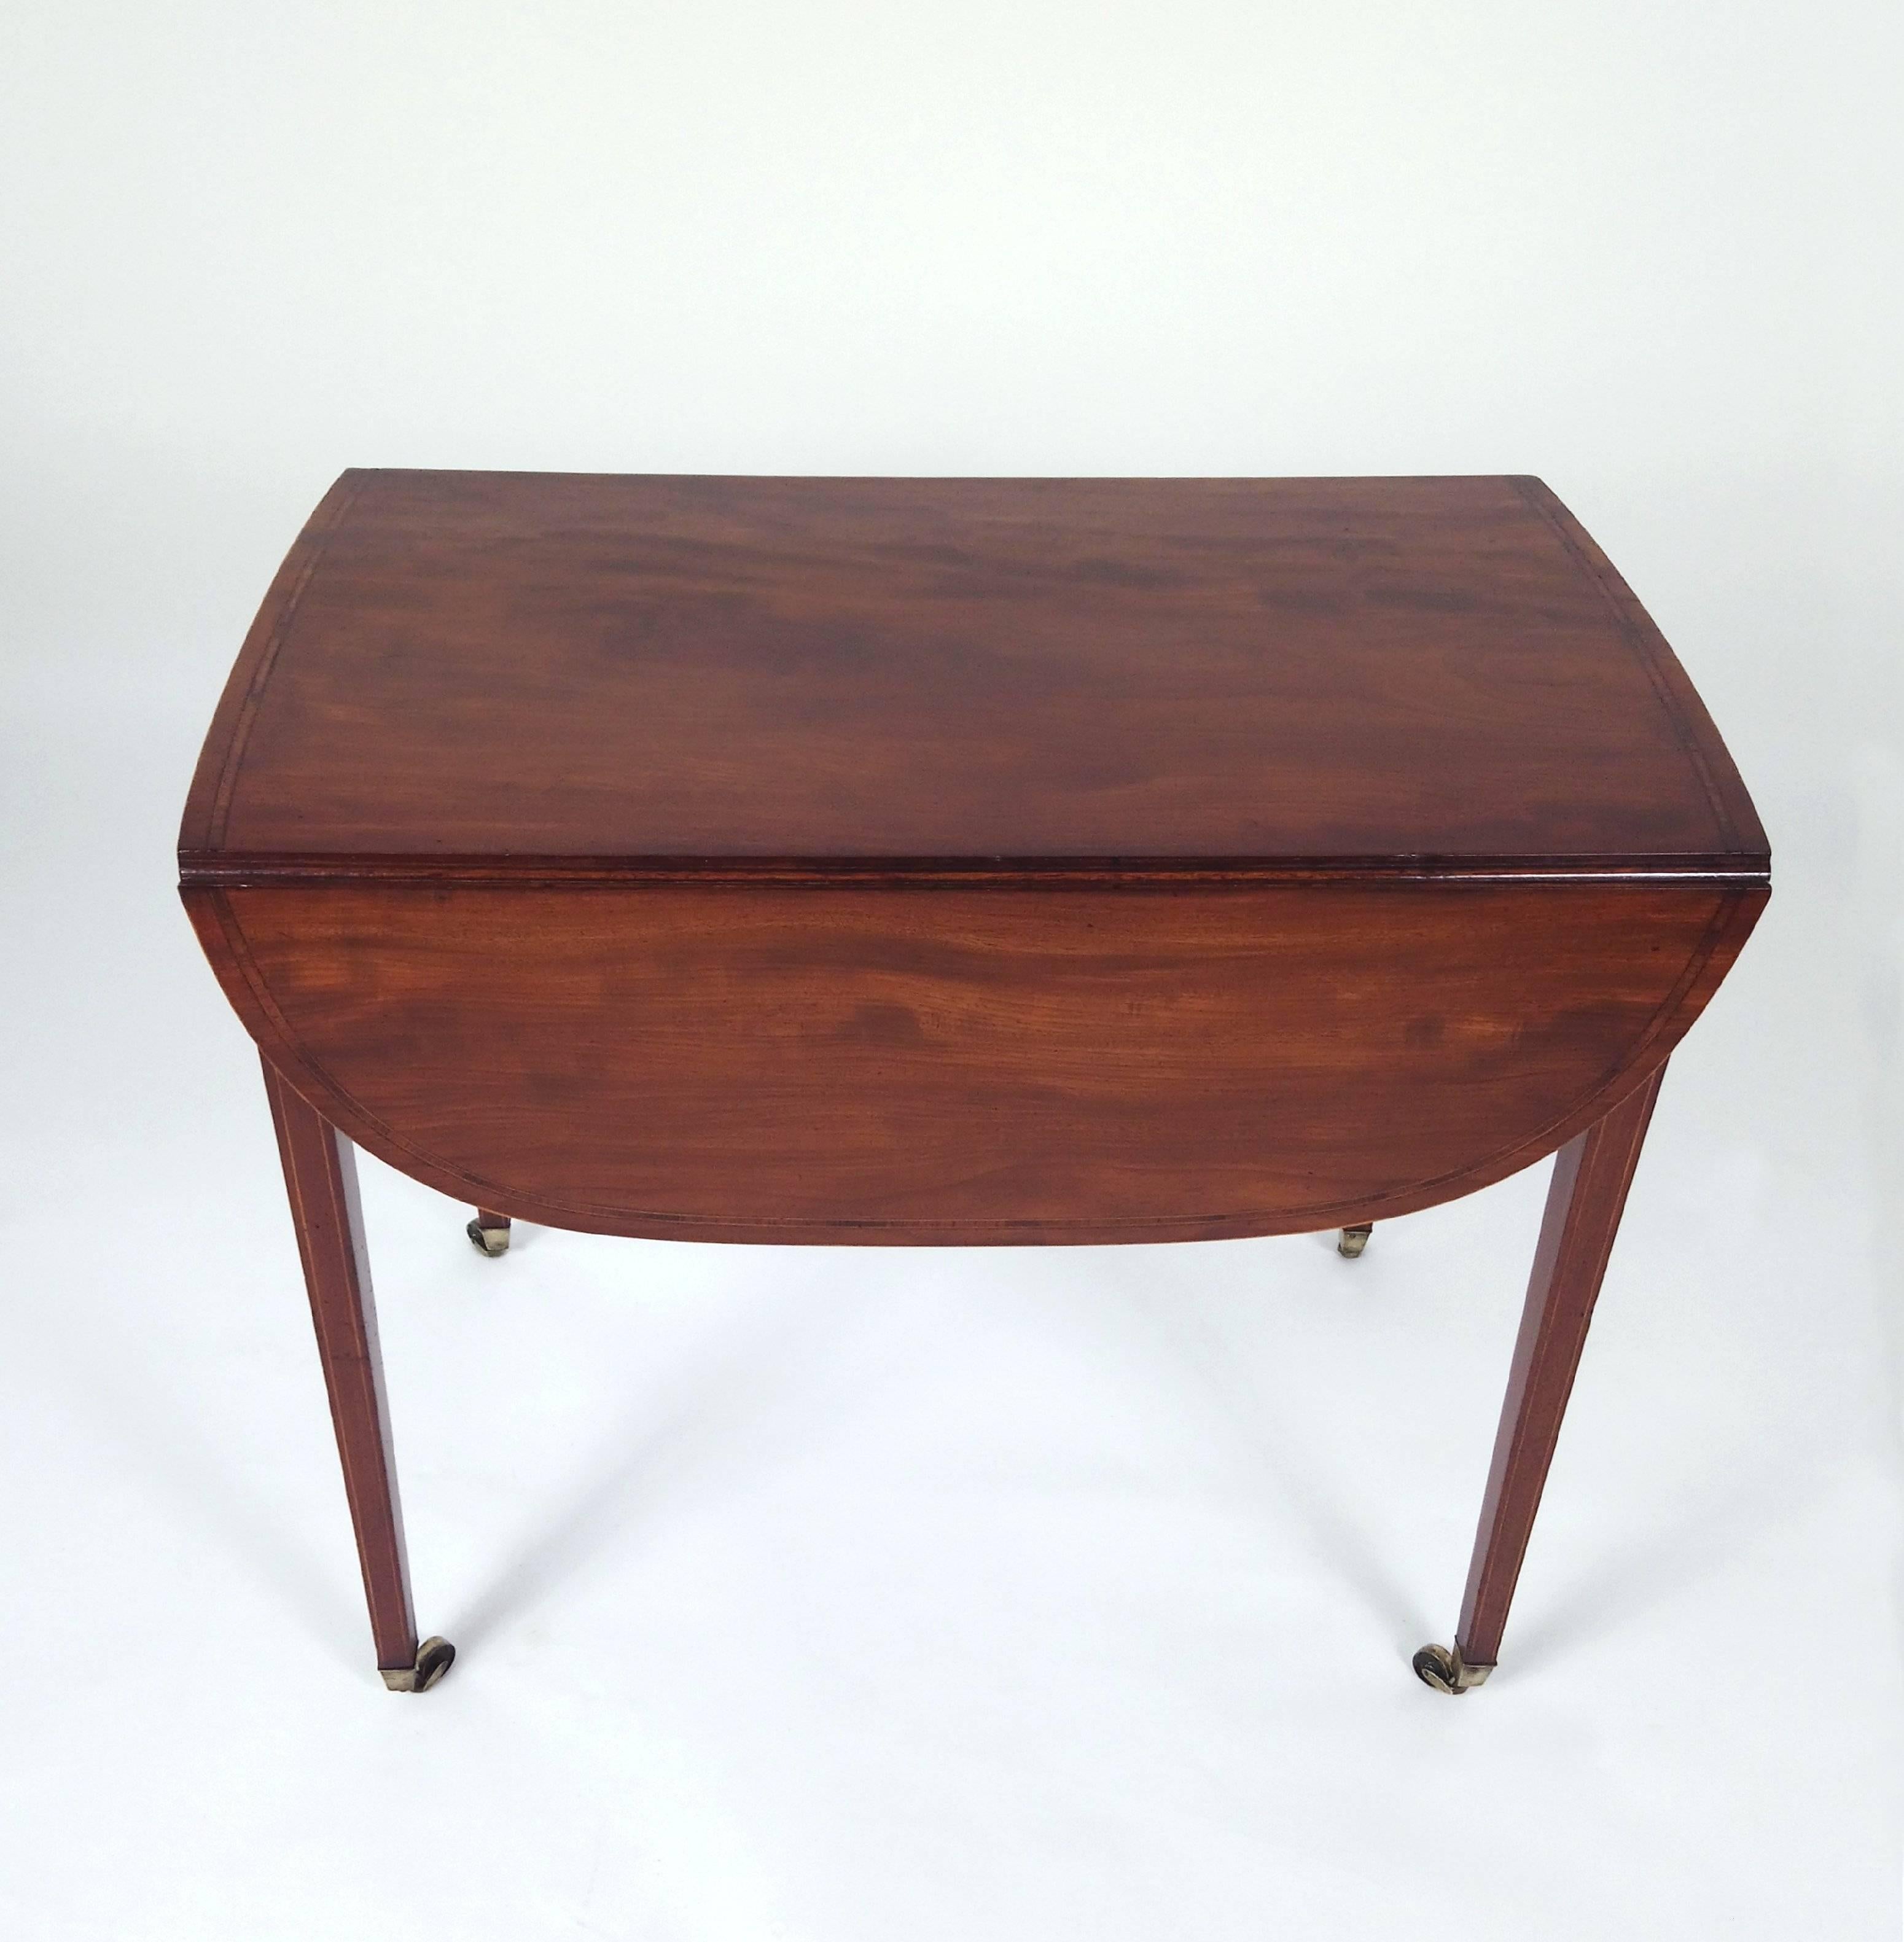 This very handsome and practical, 18th century. Sheraton design mahogany drop leaf Pembroke table features a crossbanded border around the tabletop as well as the drawers and inlaid diamond design decoration. The table has a drawer face on each